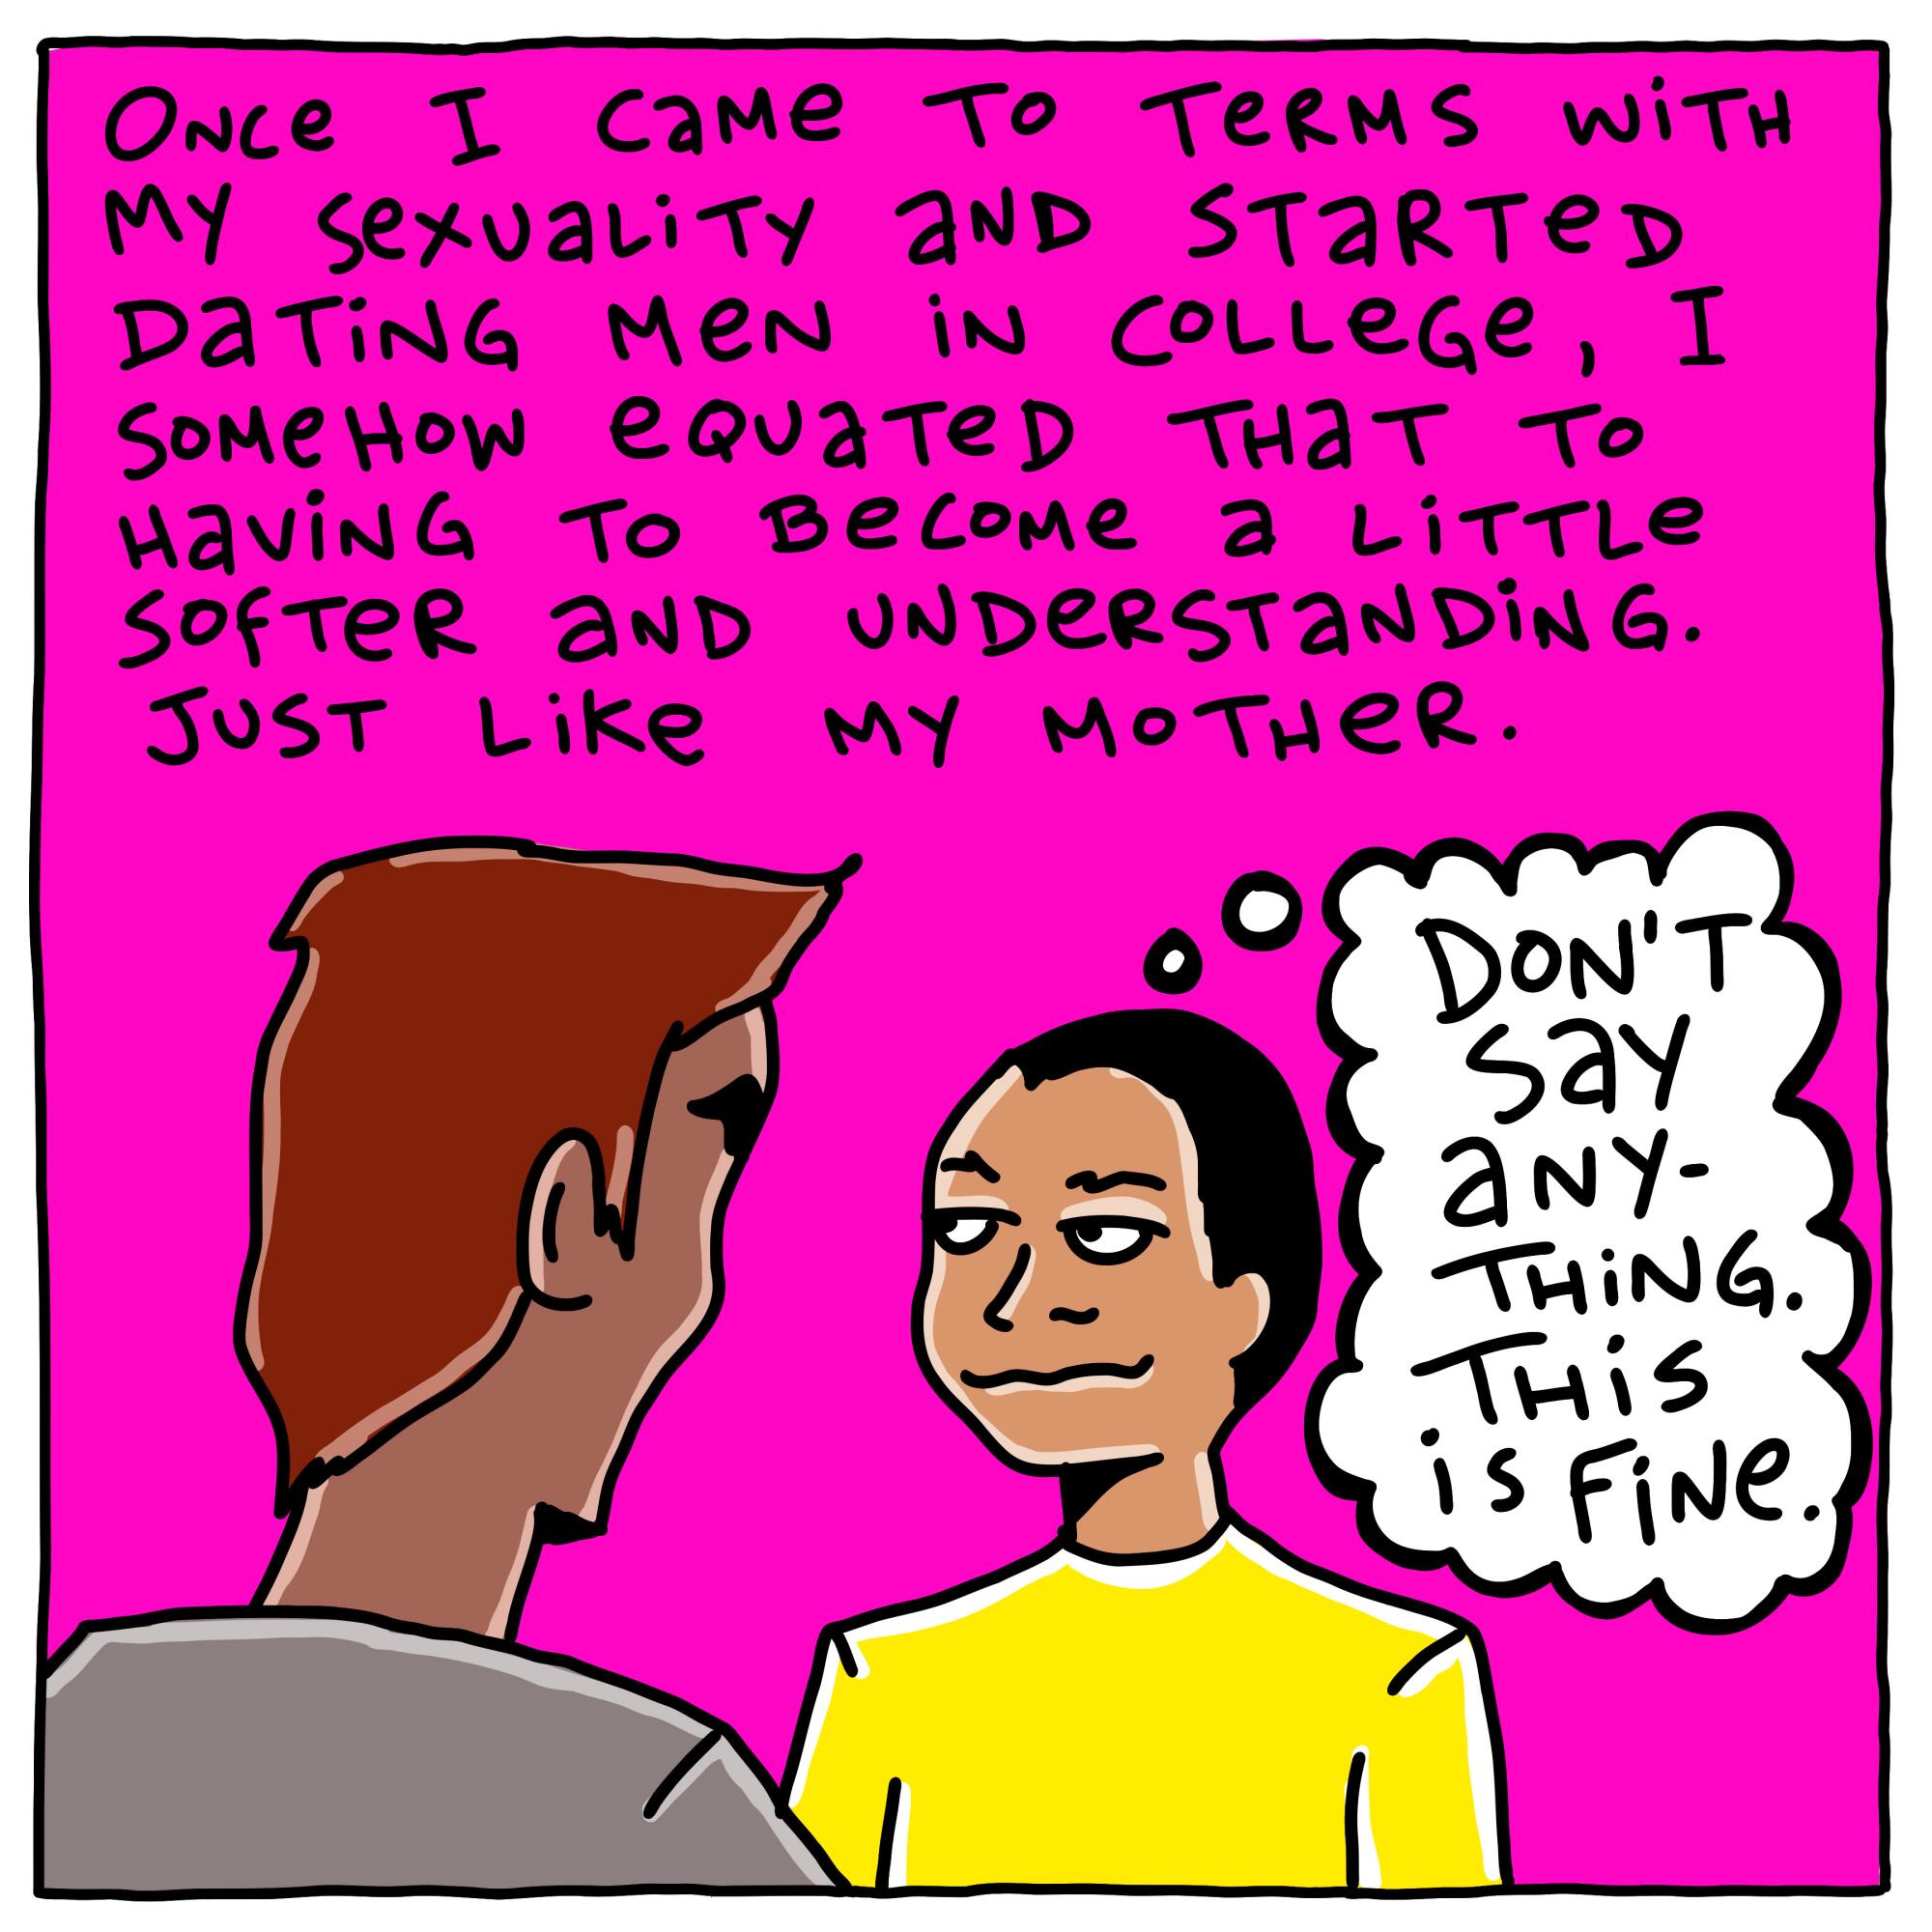 When I started dating men in college, I somehow equated that to having to be softer and understanding. 